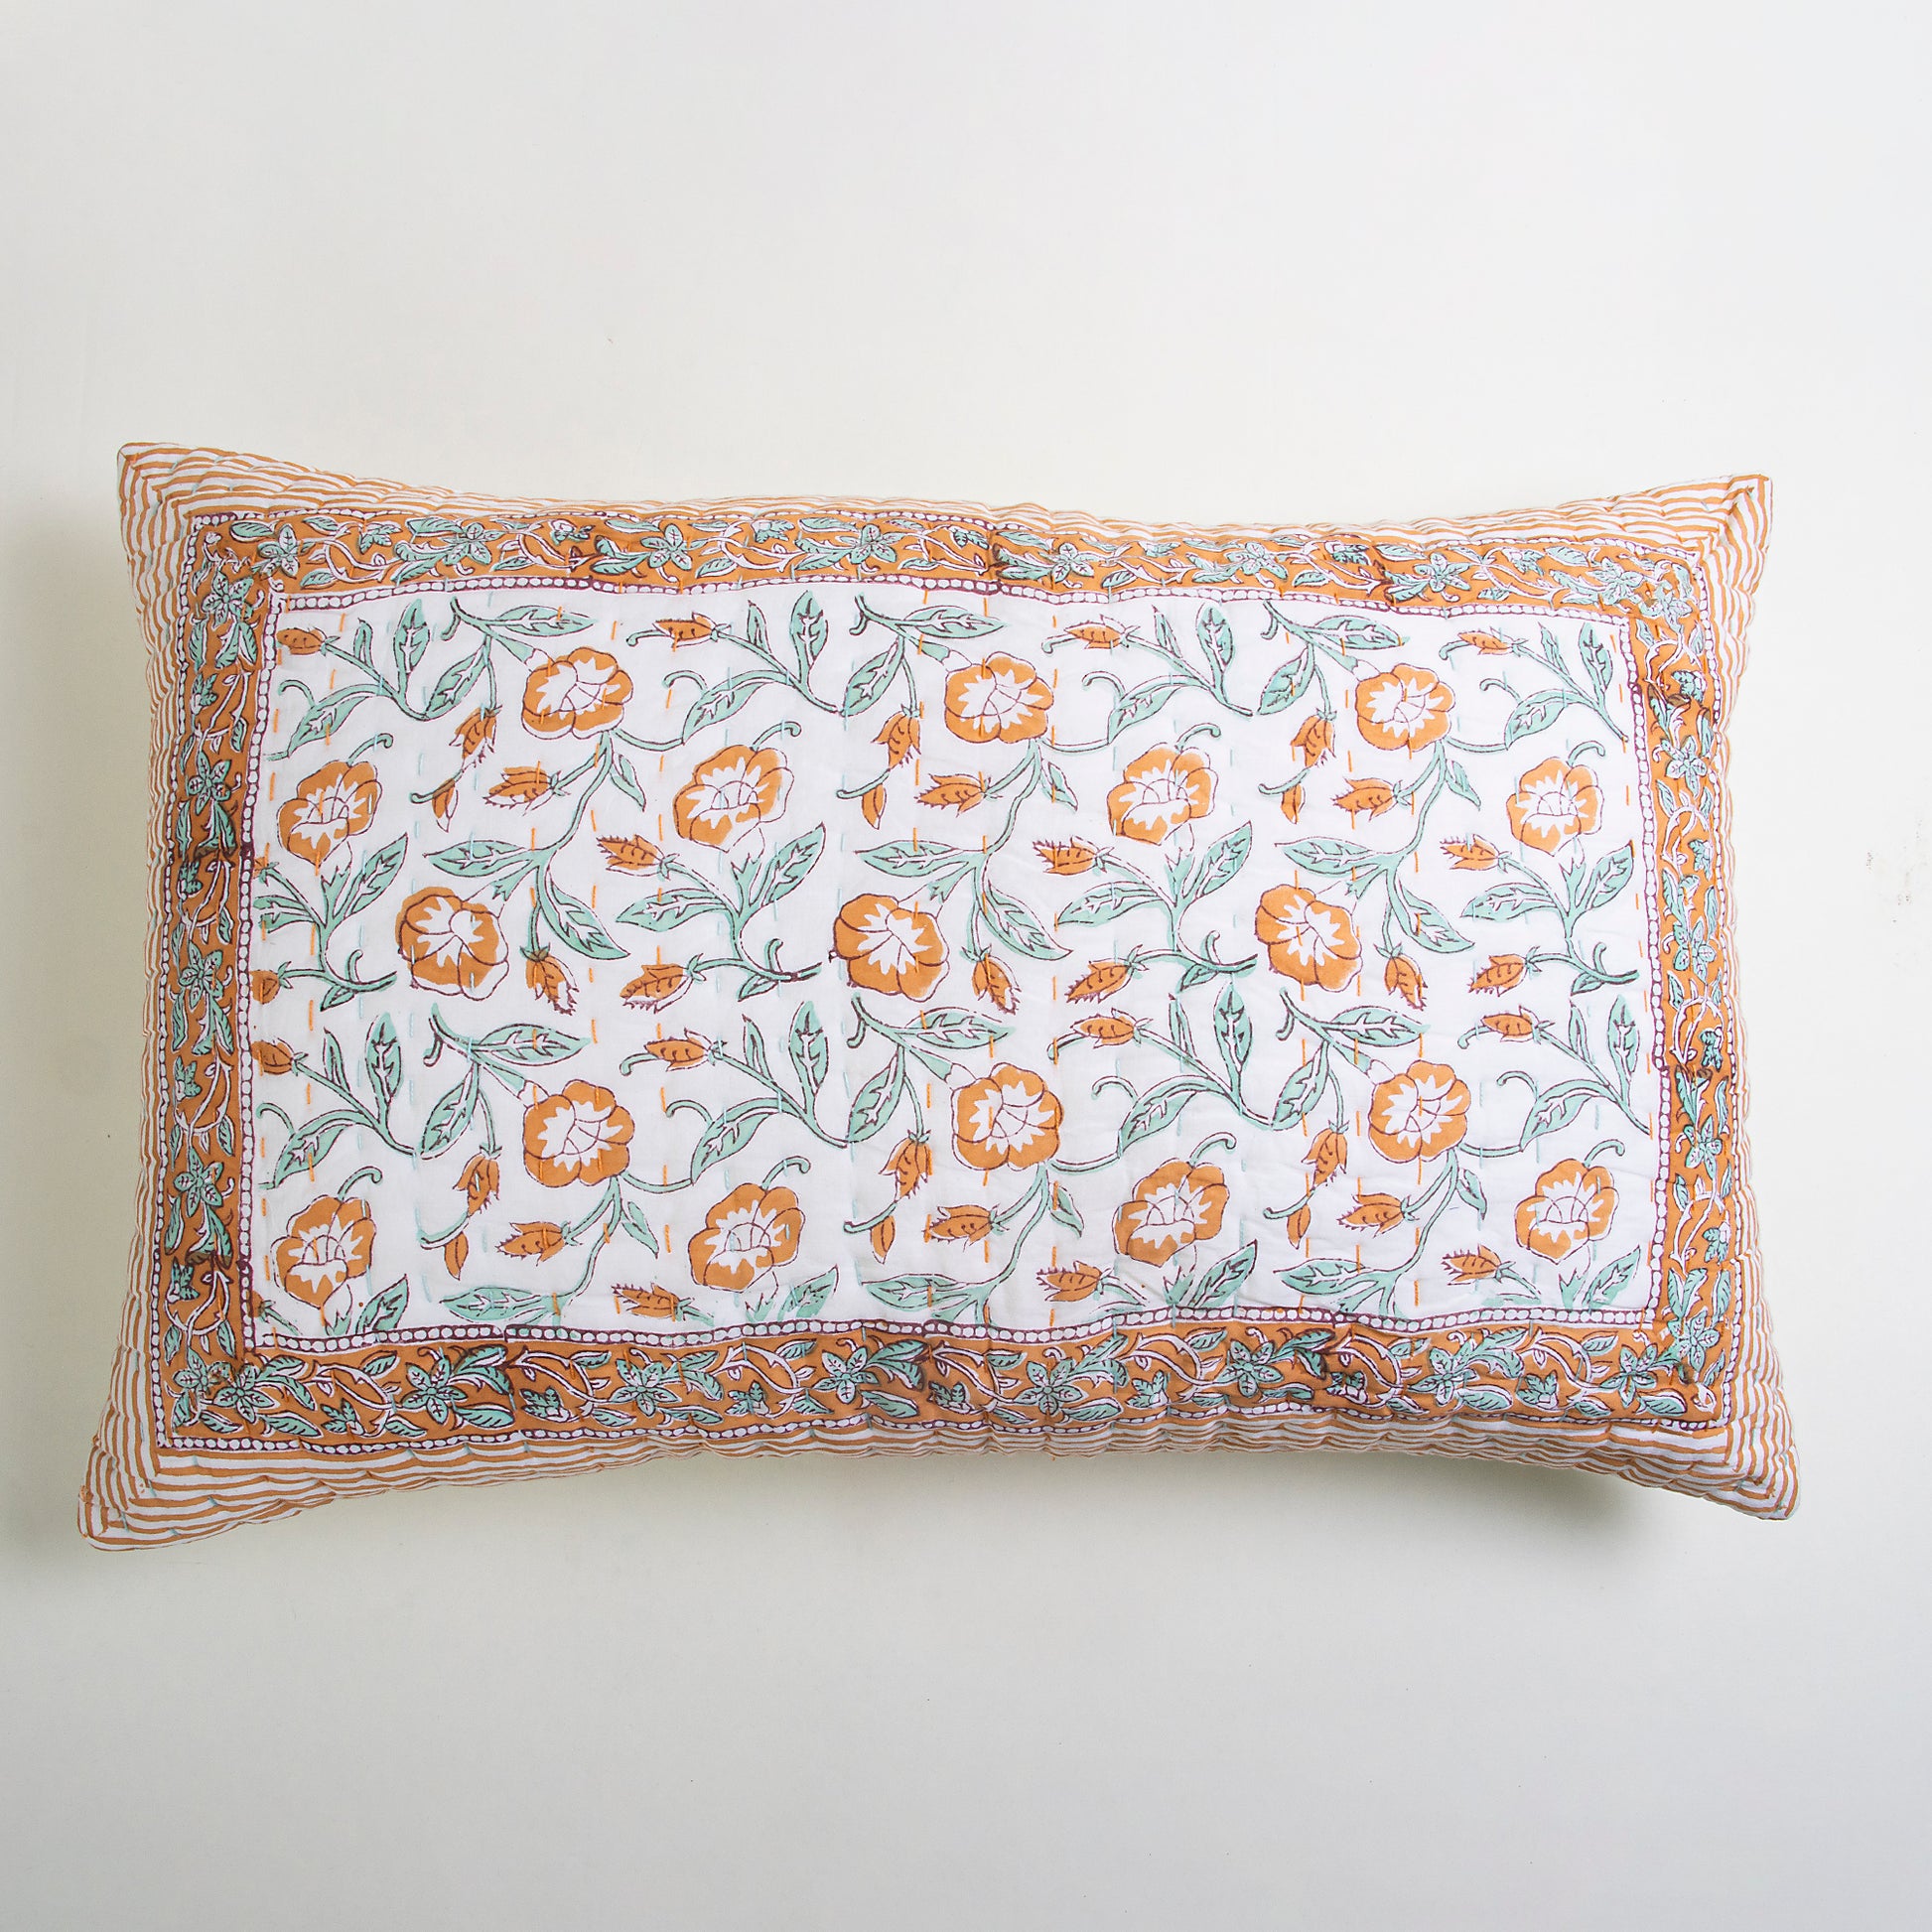 Floral Block Print Handmade Cotton Kantha Bed Pillow Covers